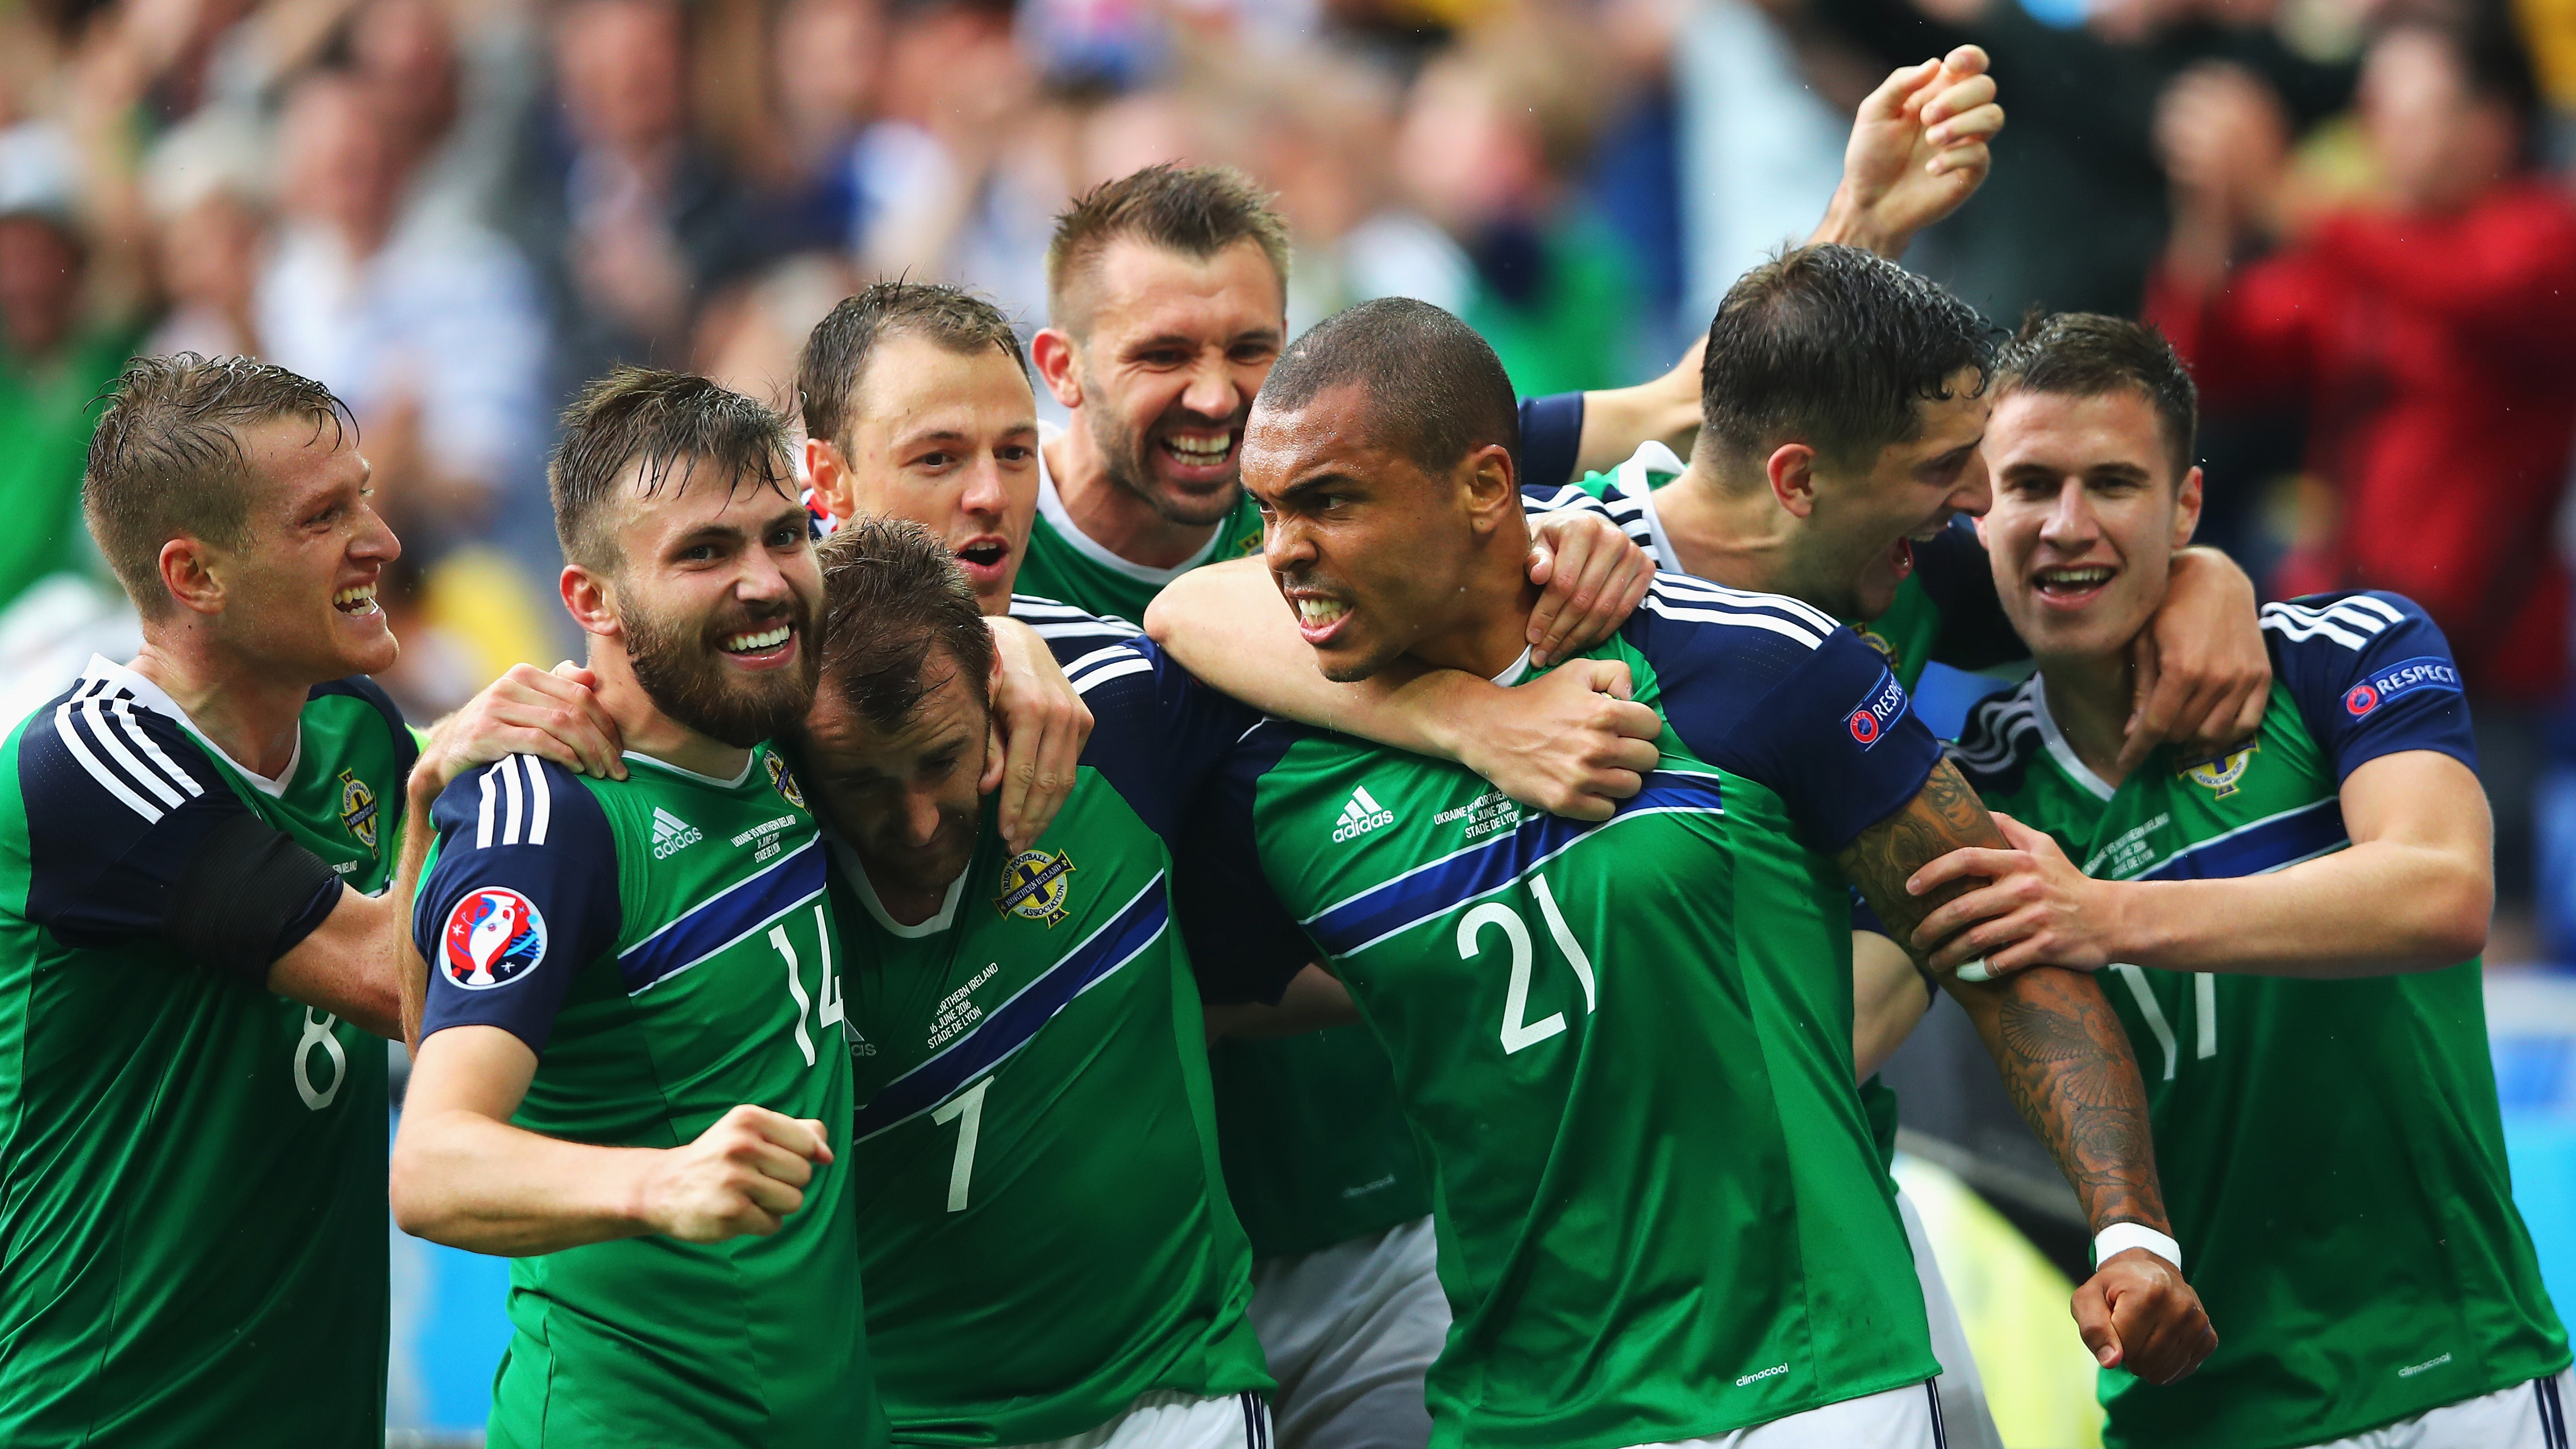 'Support for an allIreland soccer team is growing'